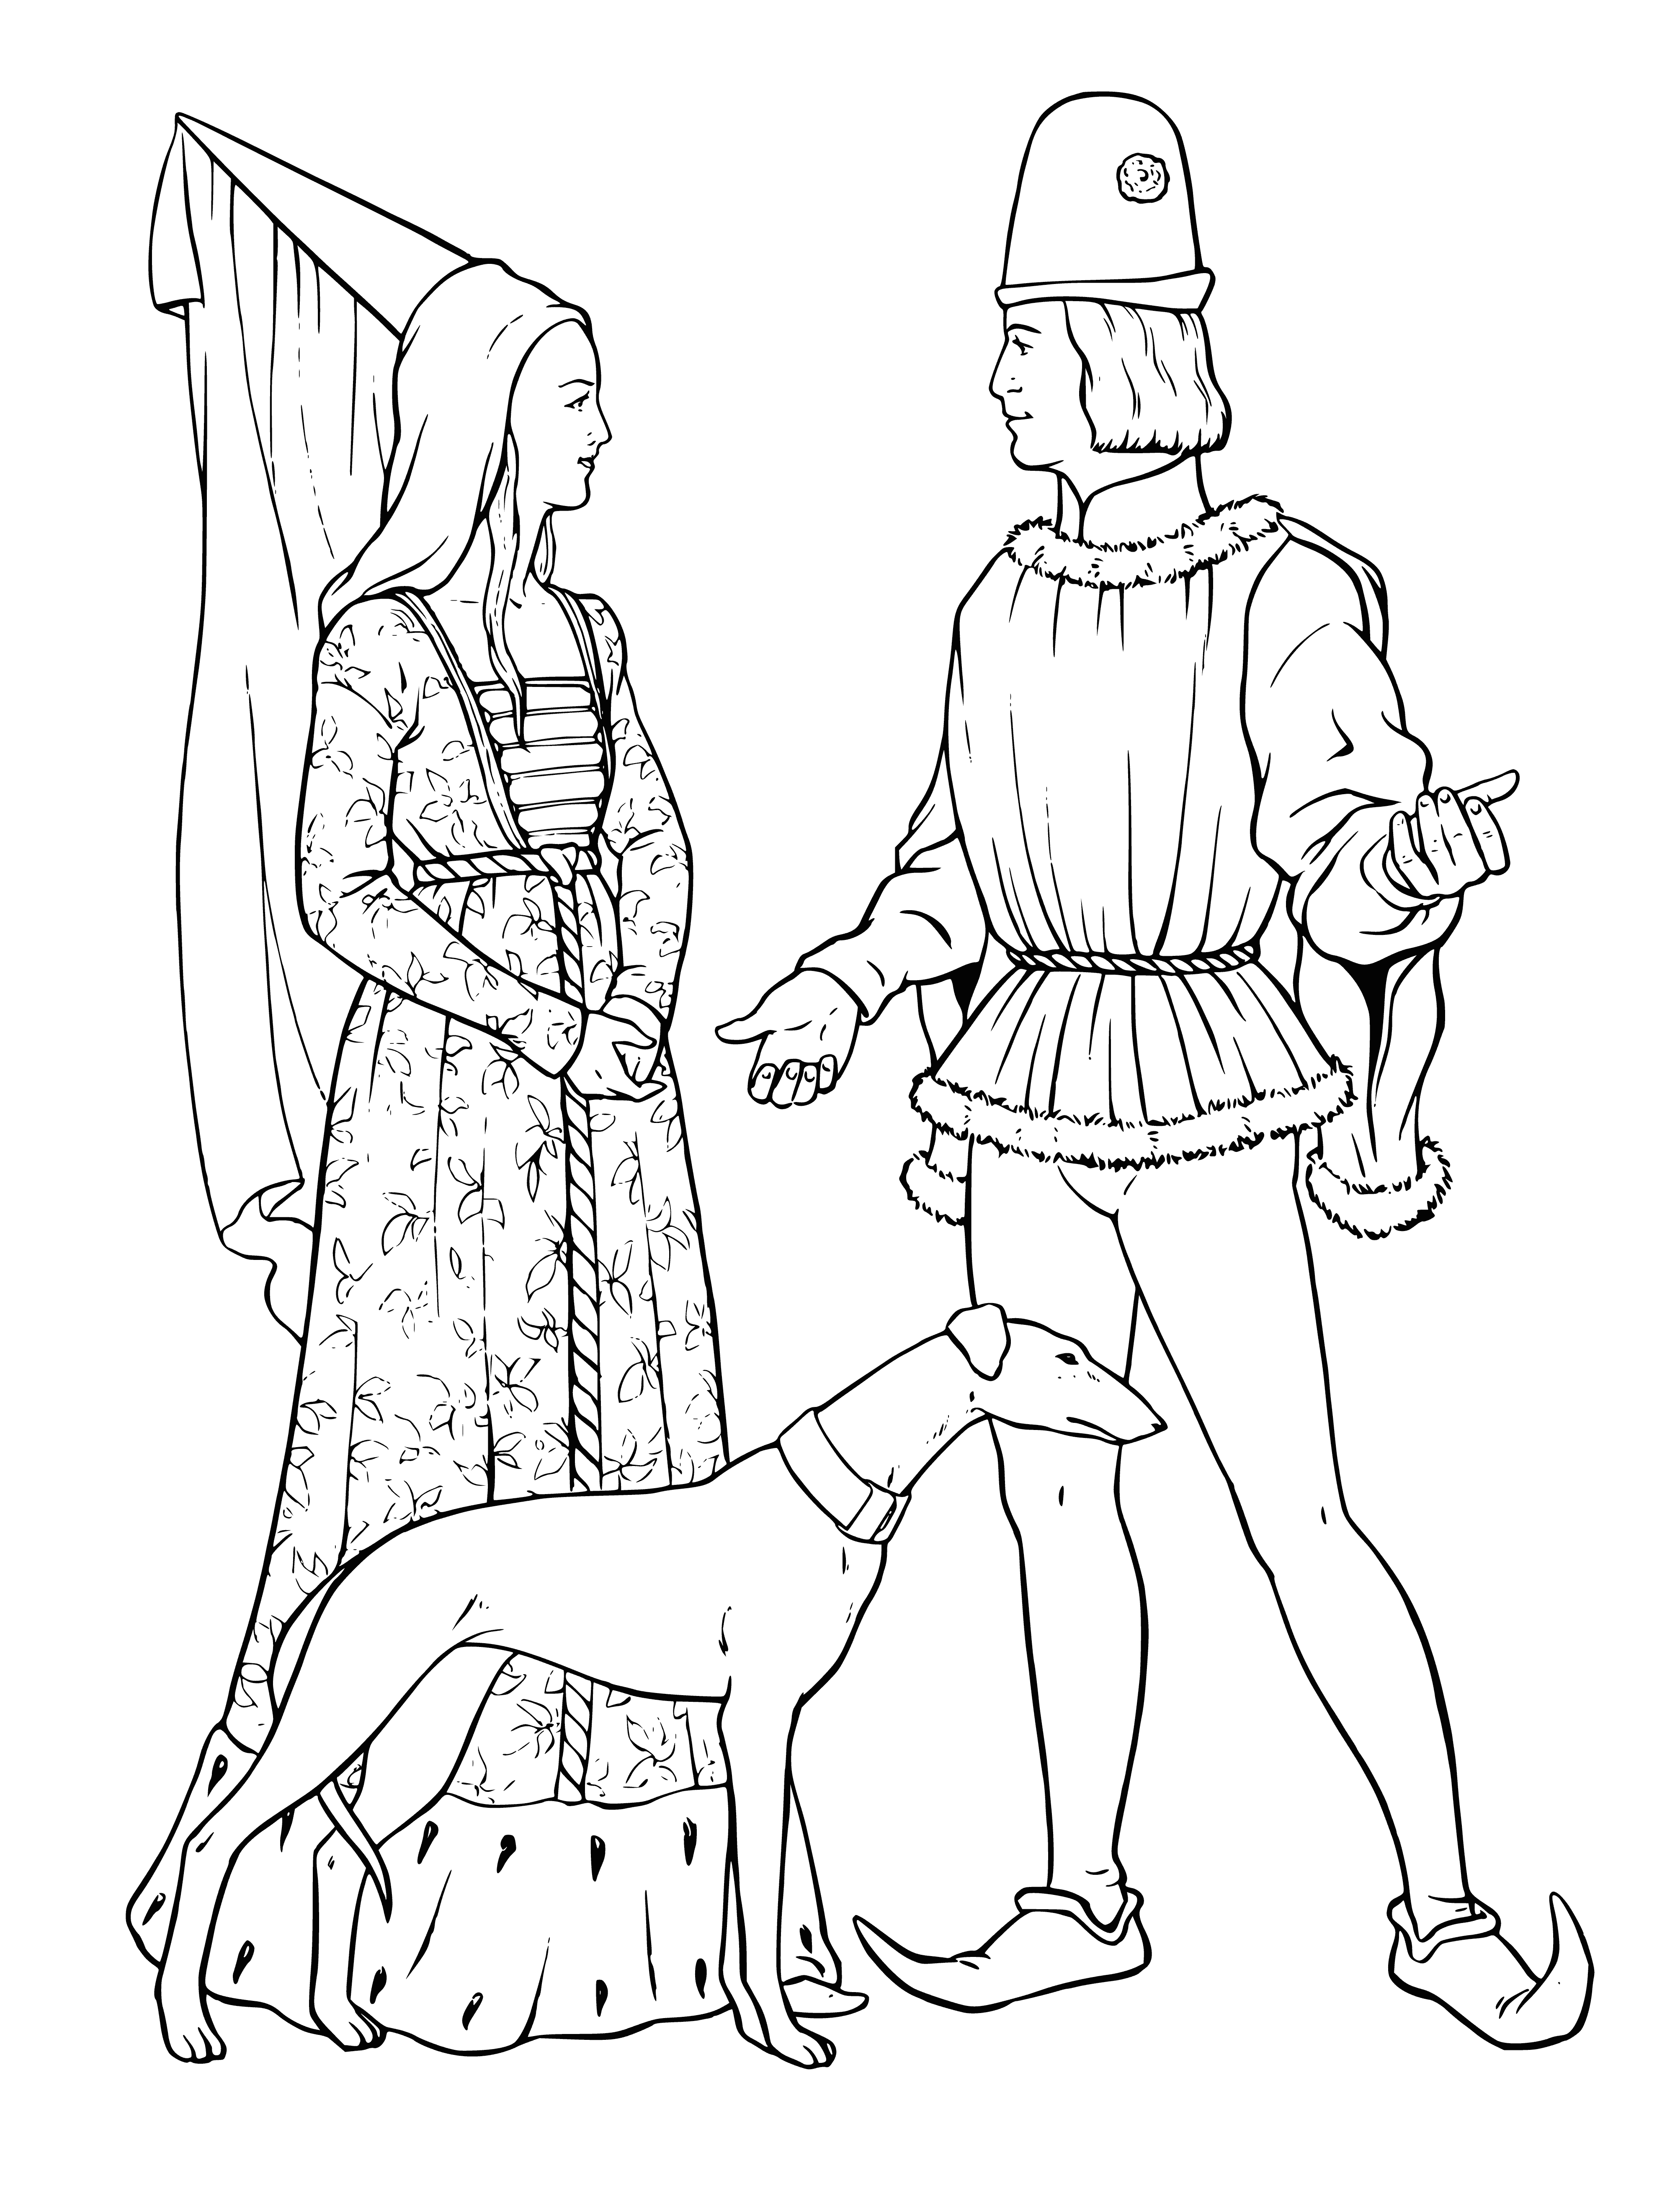 coloring page: The princess and prince stand together, happy and in love. She wears a white dress, blue sash; he wears a dark blue suit, white shirt, red tie. Hand on waist, hand on arm, they smile.